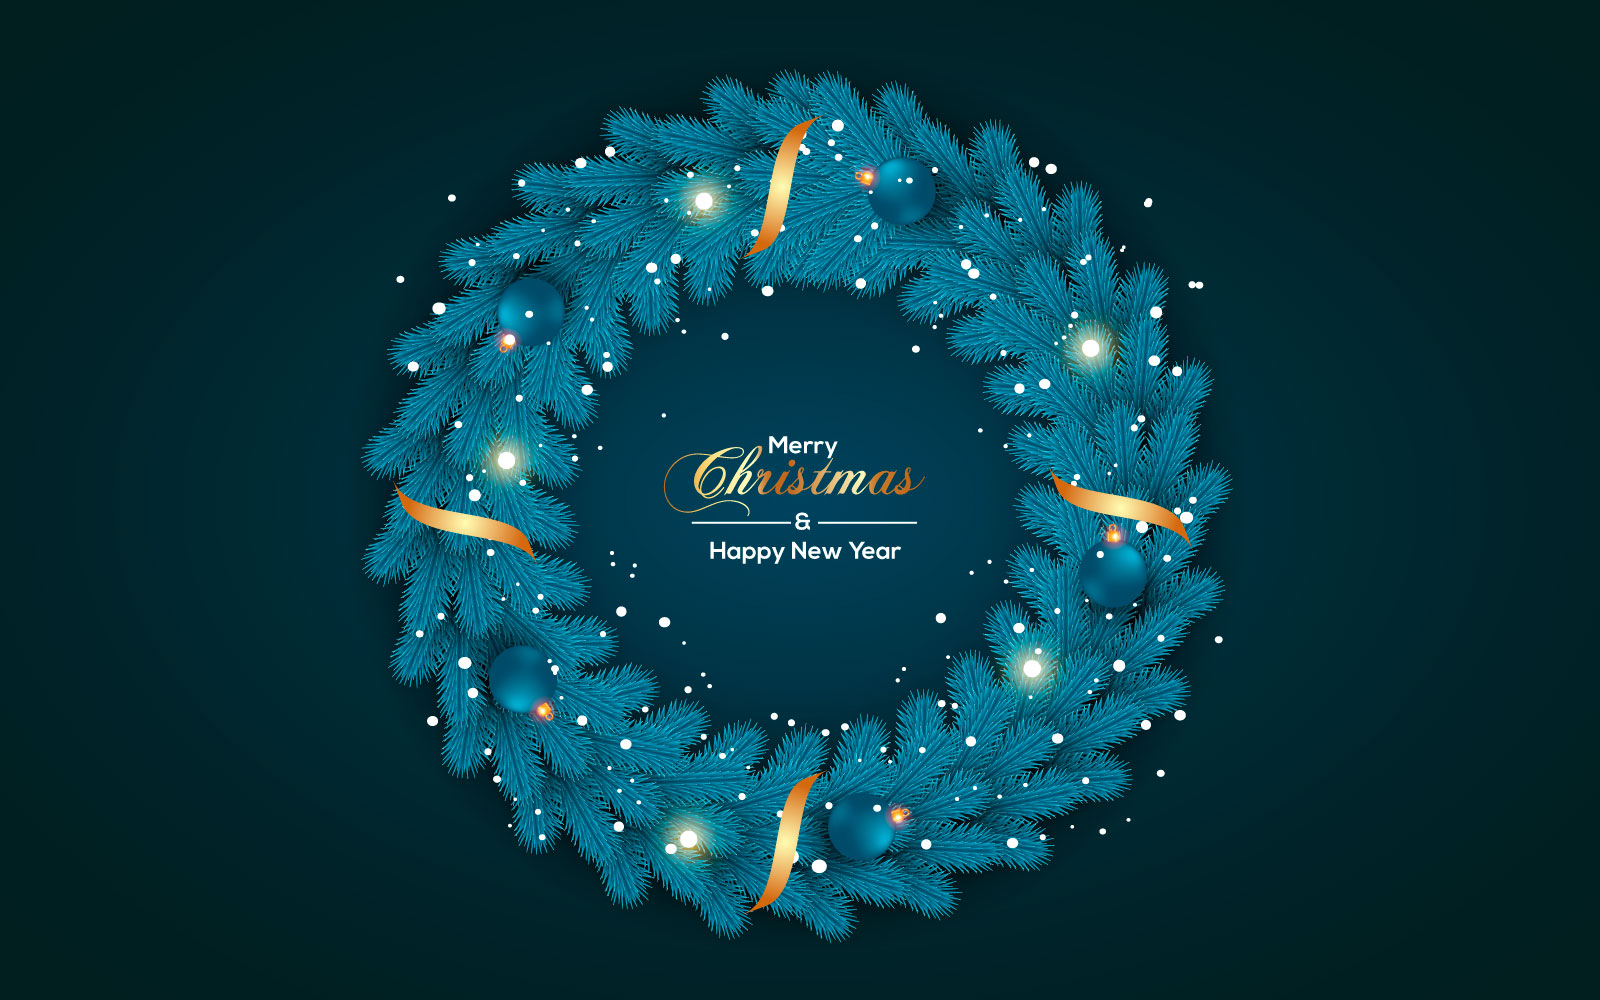 Christmas wreath vector concept design. christmas text in grass wreath element with leaves